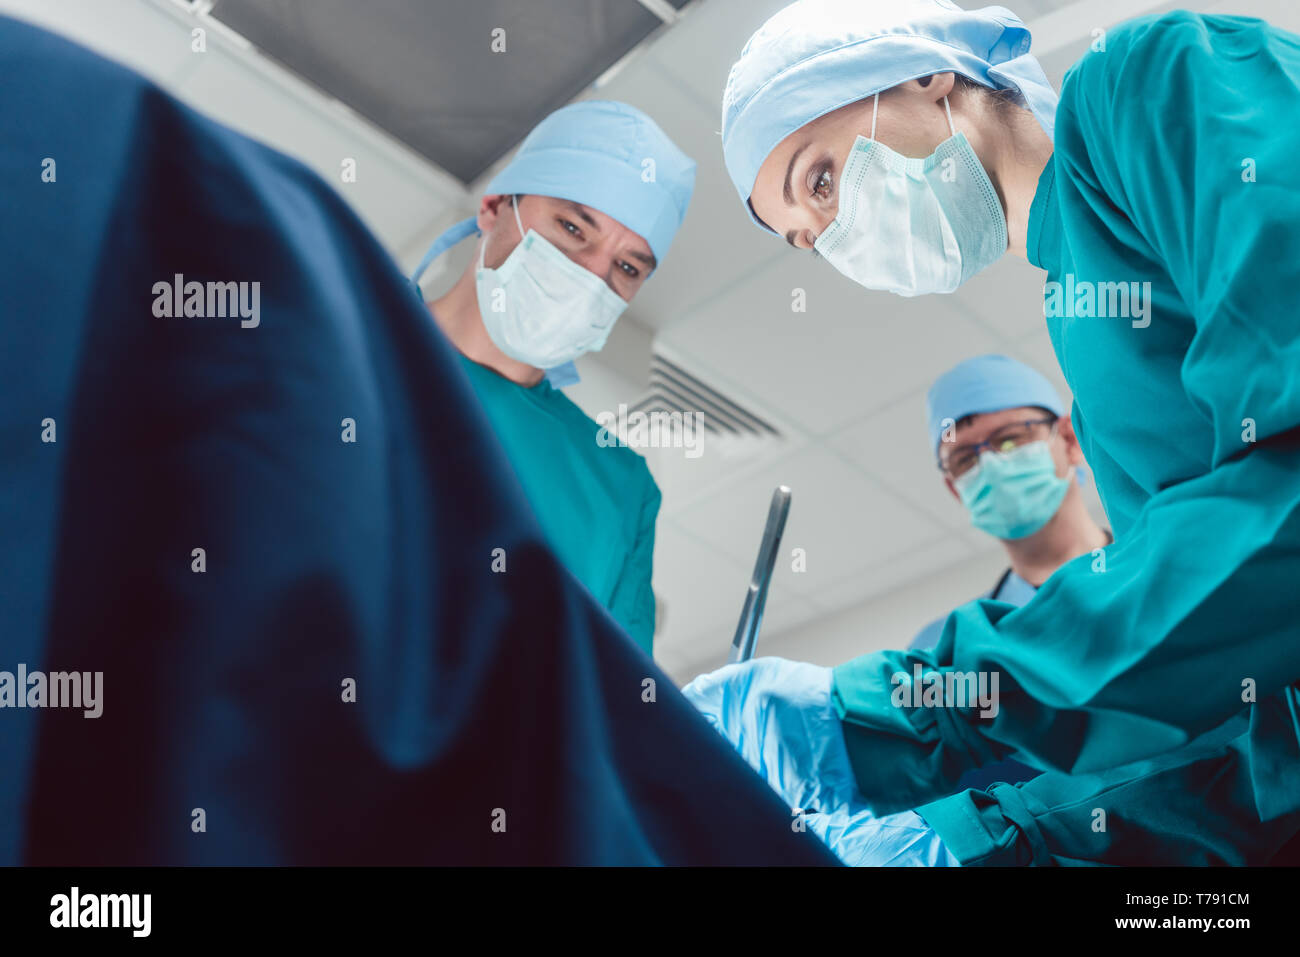 Team of surgeons in operation room during surgery Stock Photo